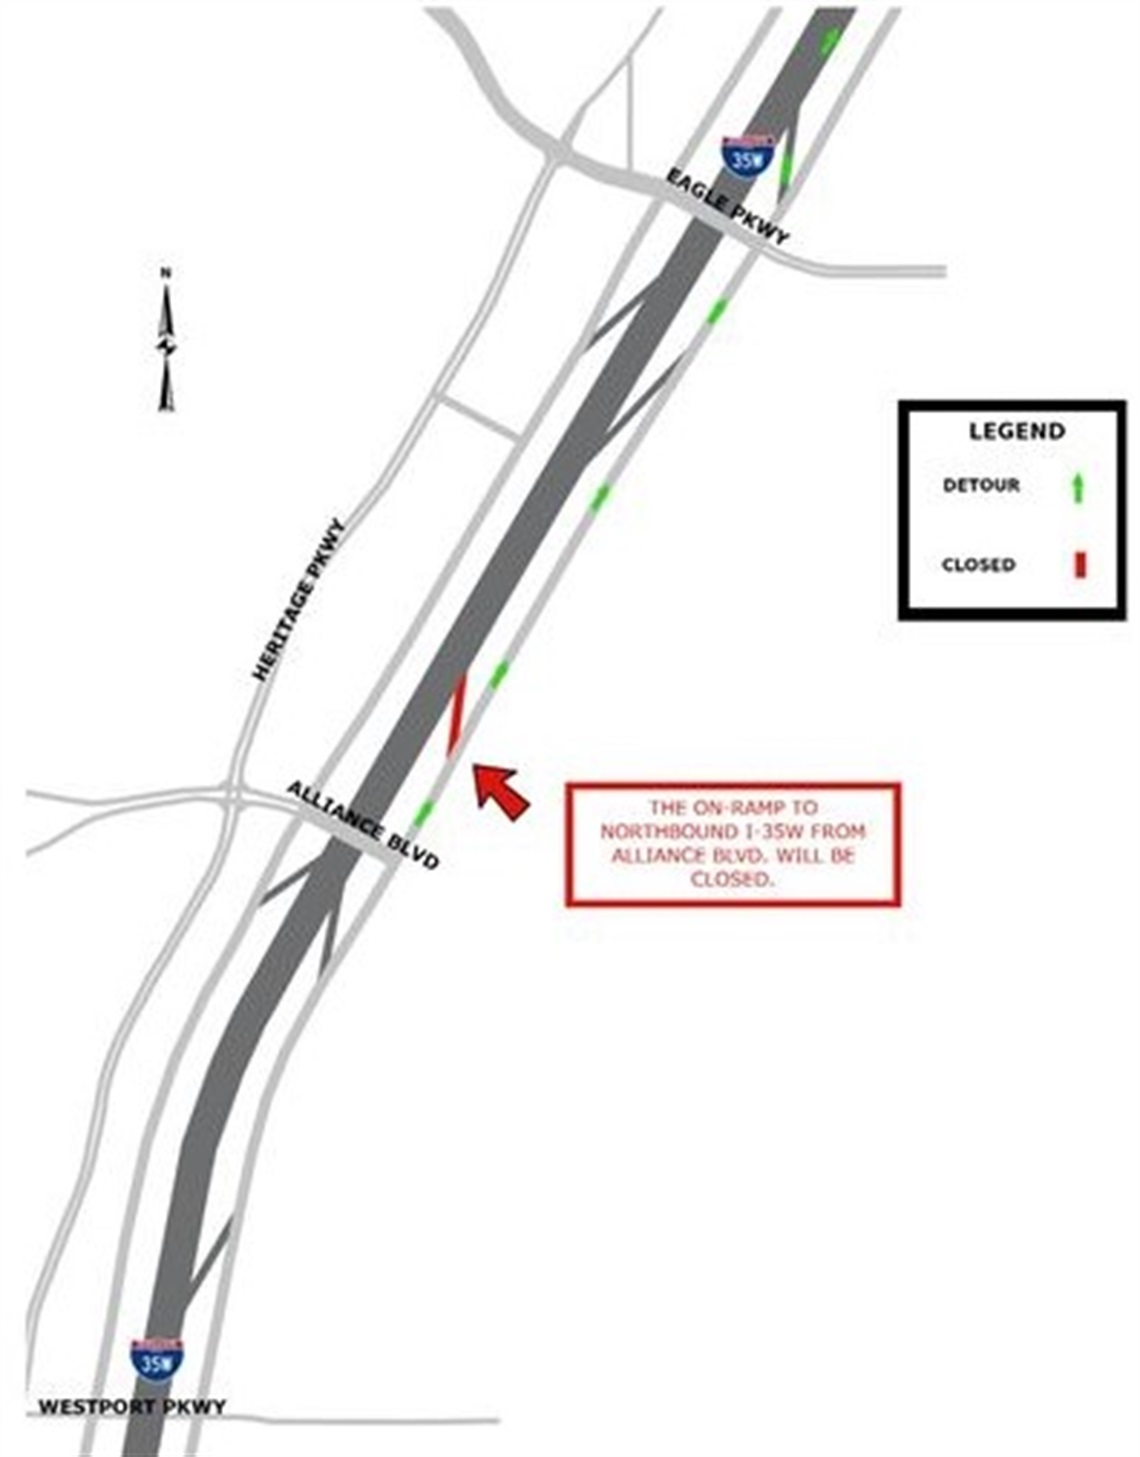 Northbound I-35W on-ramp to close at Alliance - City of Fort Worth